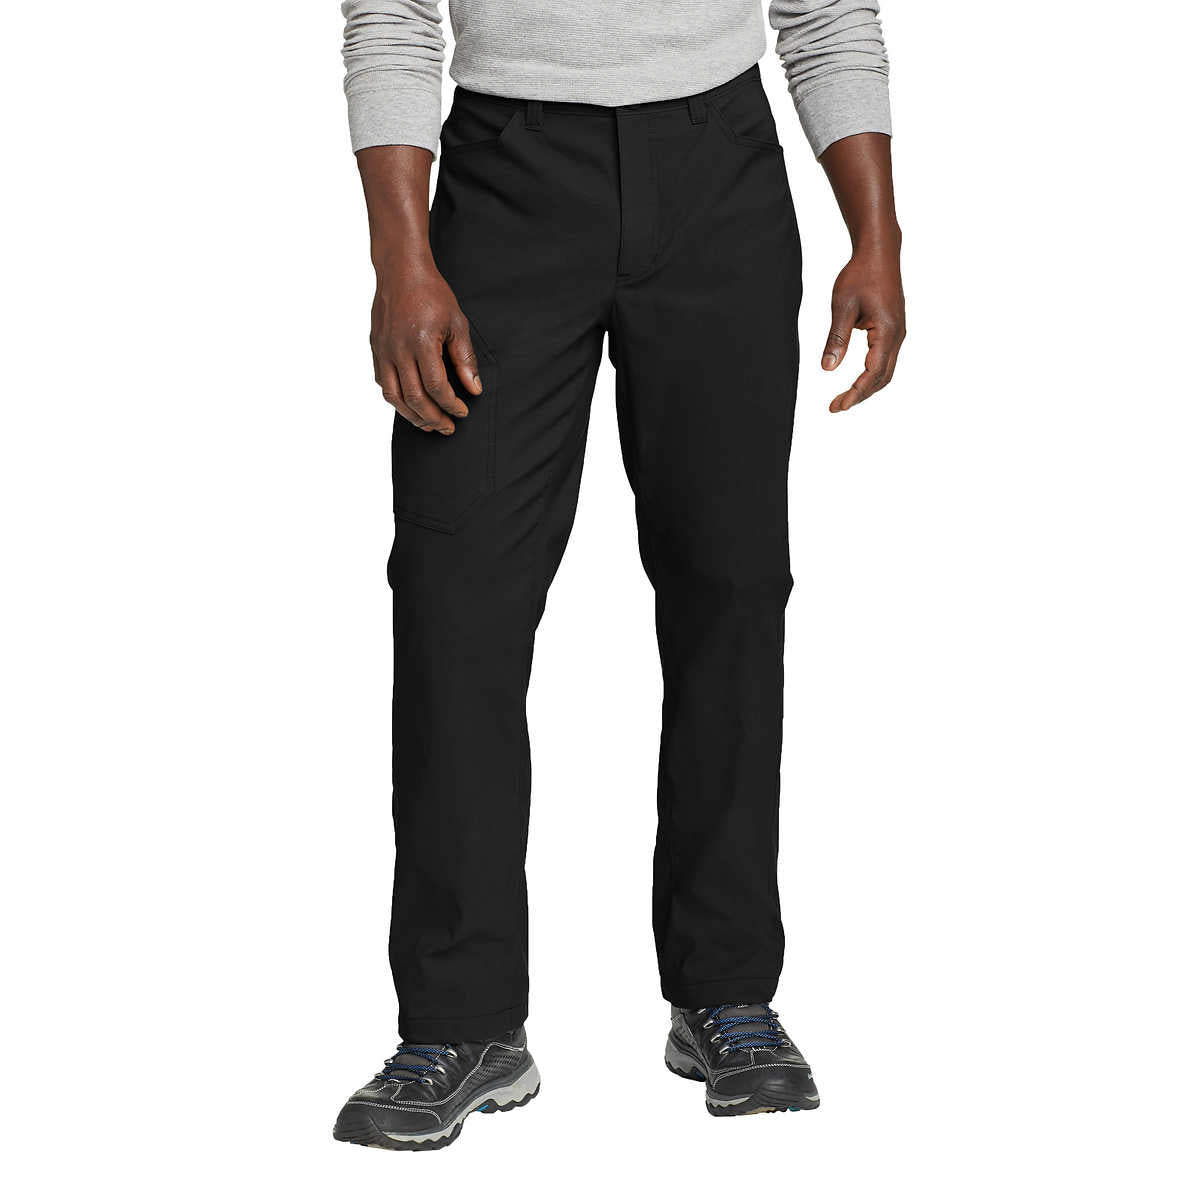 Eddie Bauer Fleece Lined Pants Black Size 4 - $15 - From Maria